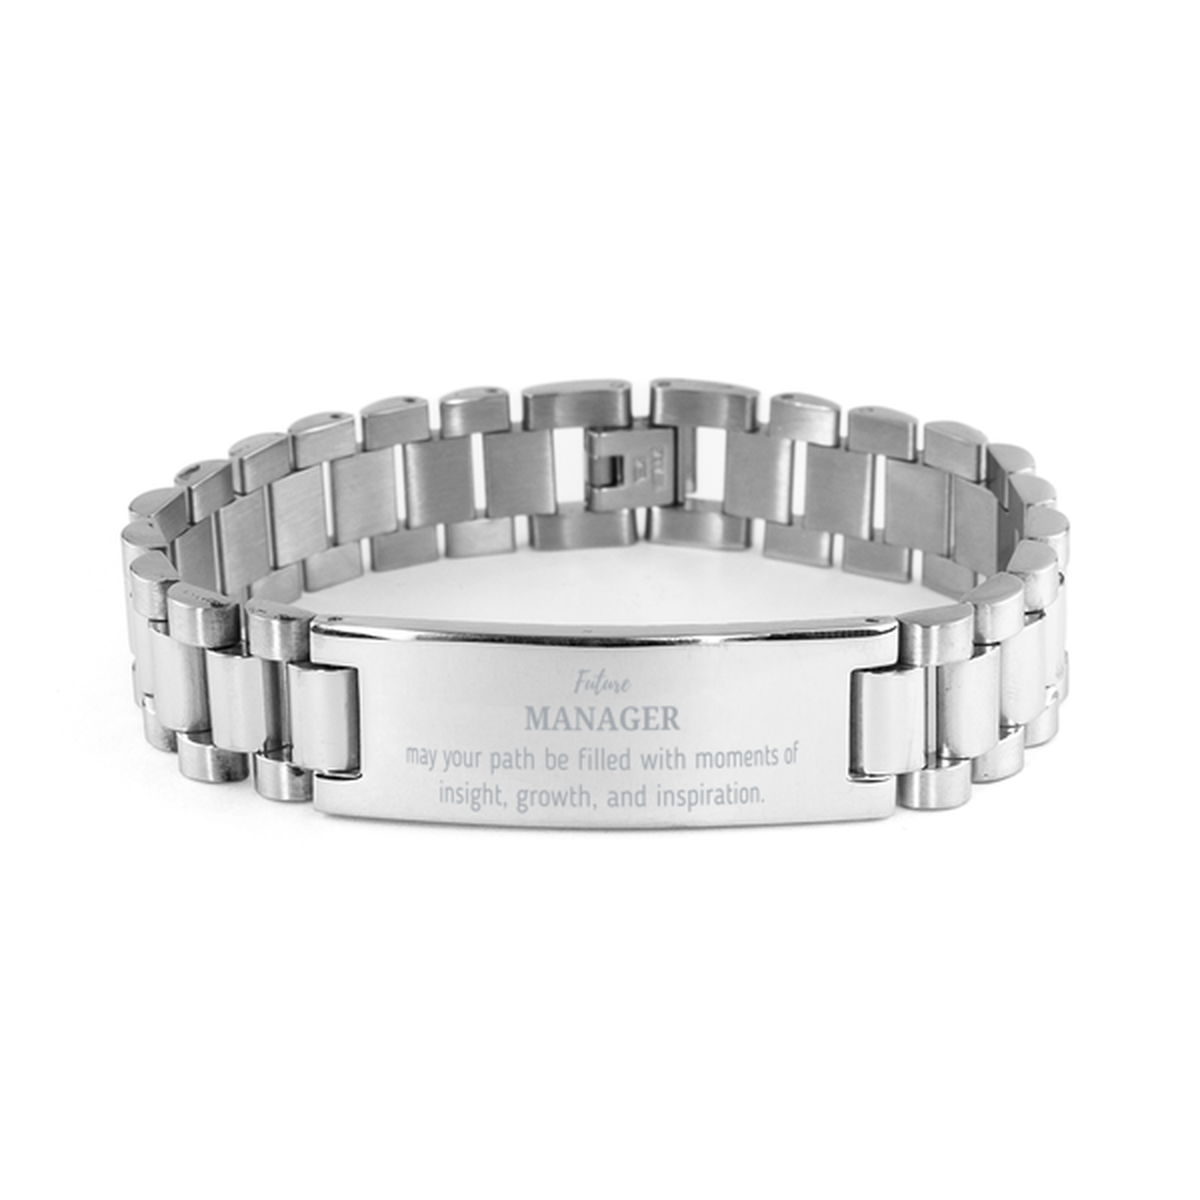 Future Manager Gifts, May your path be filled with moments of insight, Graduation Gifts for New Manager, Christmas Unique Ladder Stainless Steel Bracelet For Men, Women, Friends